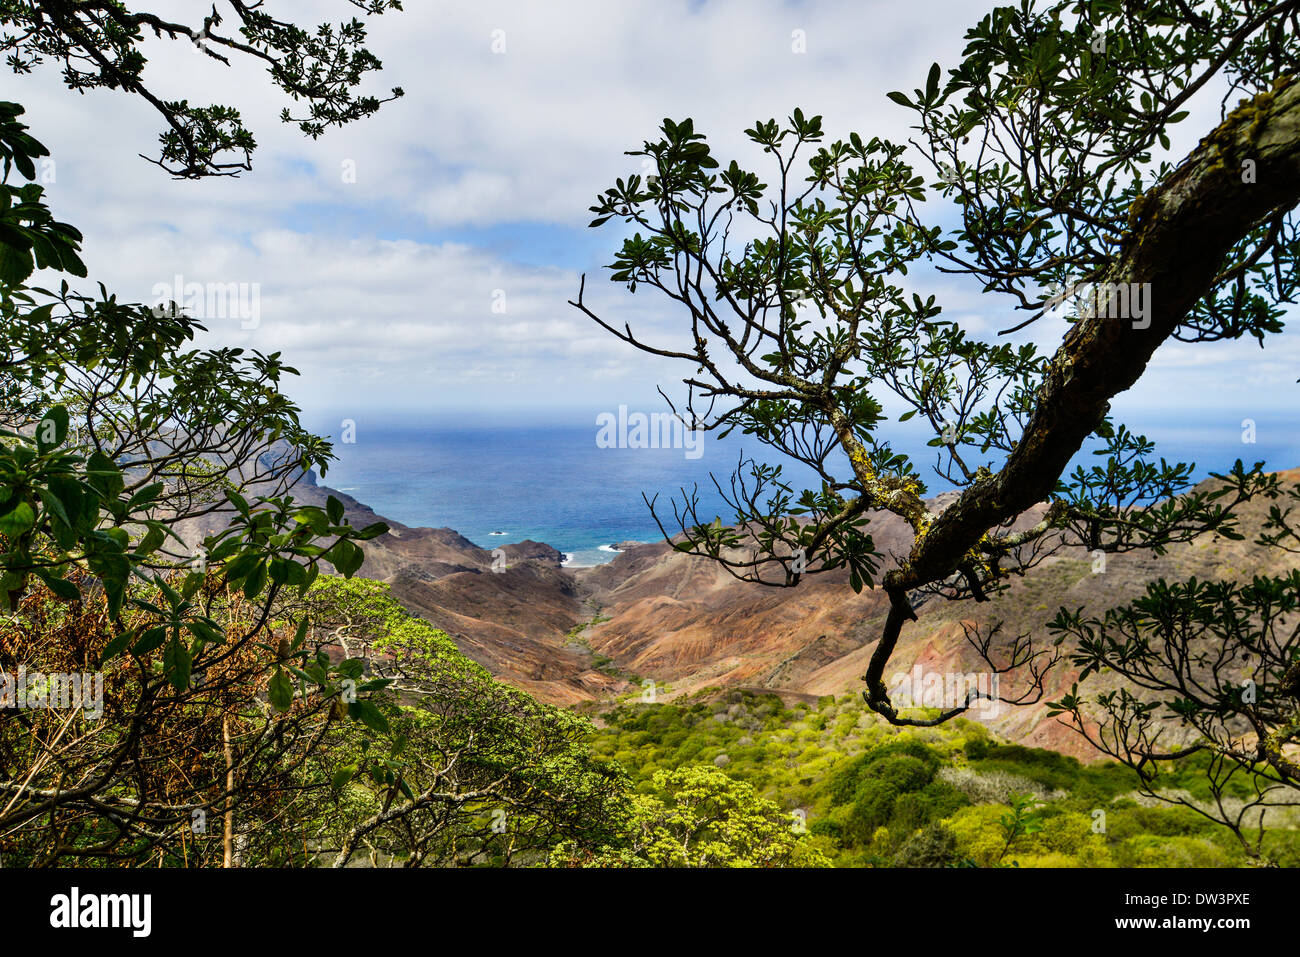 Endemic Gumwood trees and Sandy Bay on the island of St Helena in the South Atlantic Ocean Stock Photo